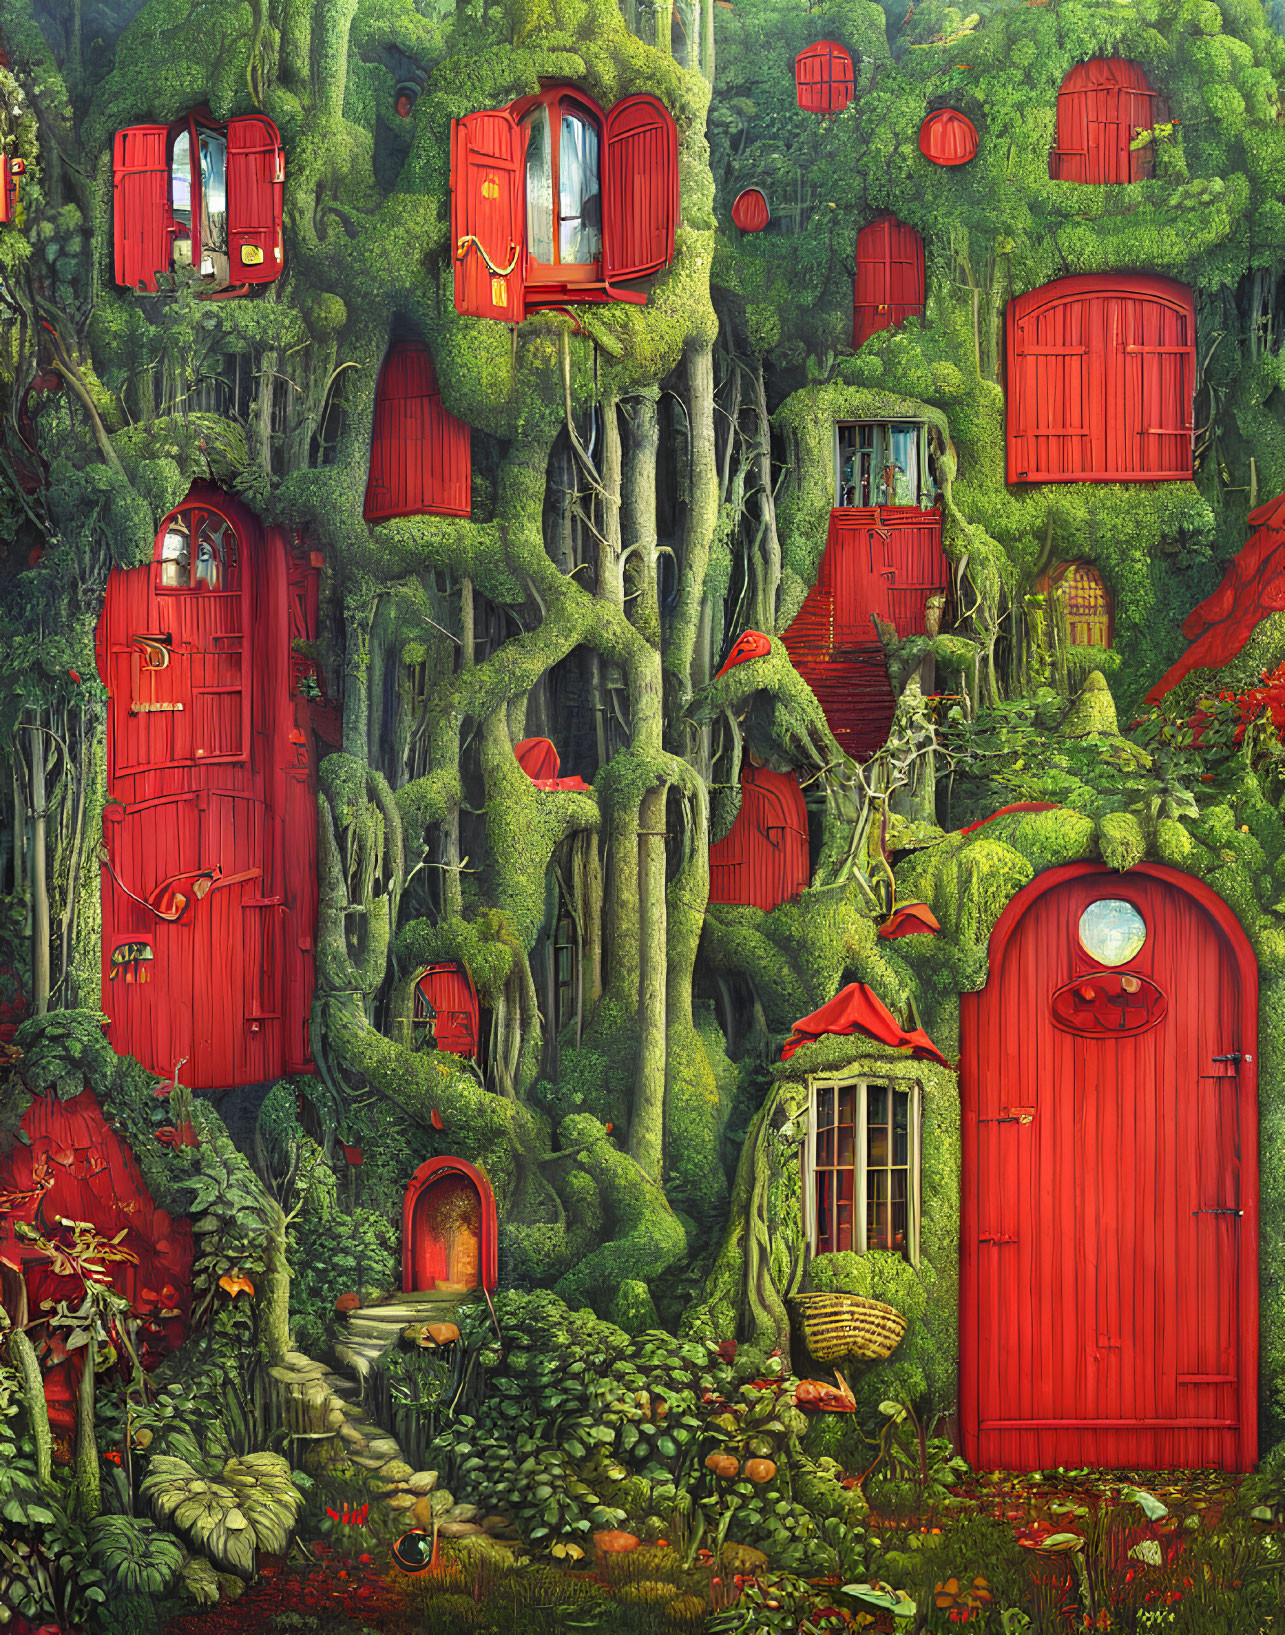 Detailed illustration of magical tree with lush greenery and red doors